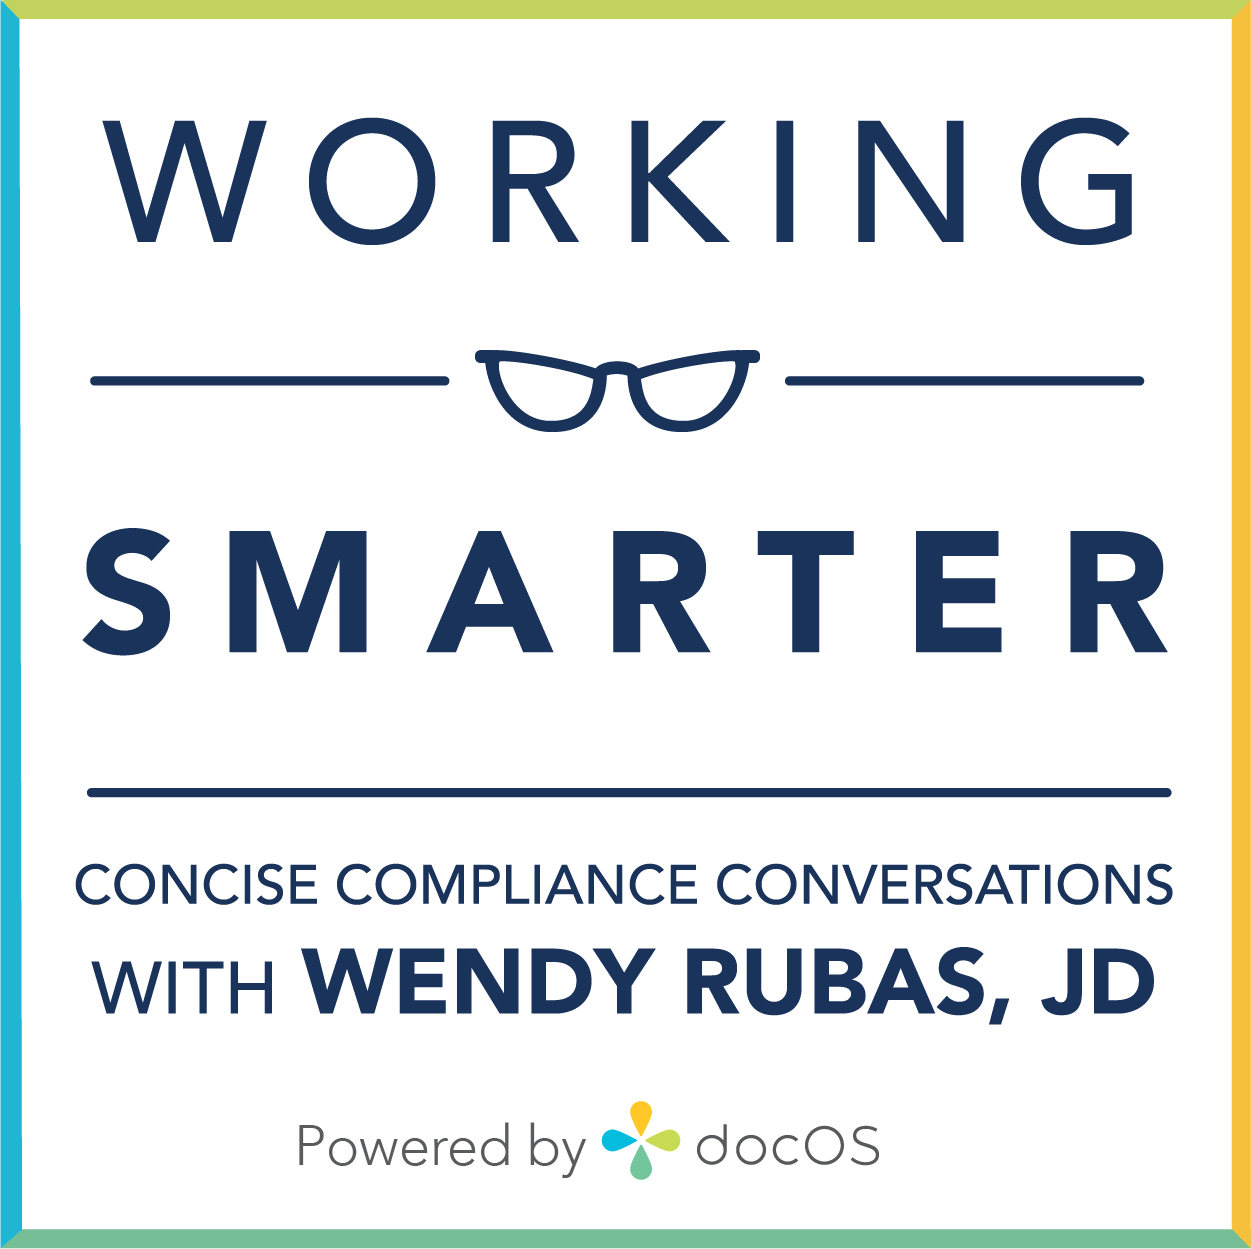 Working Smarter: New Codes for New Services